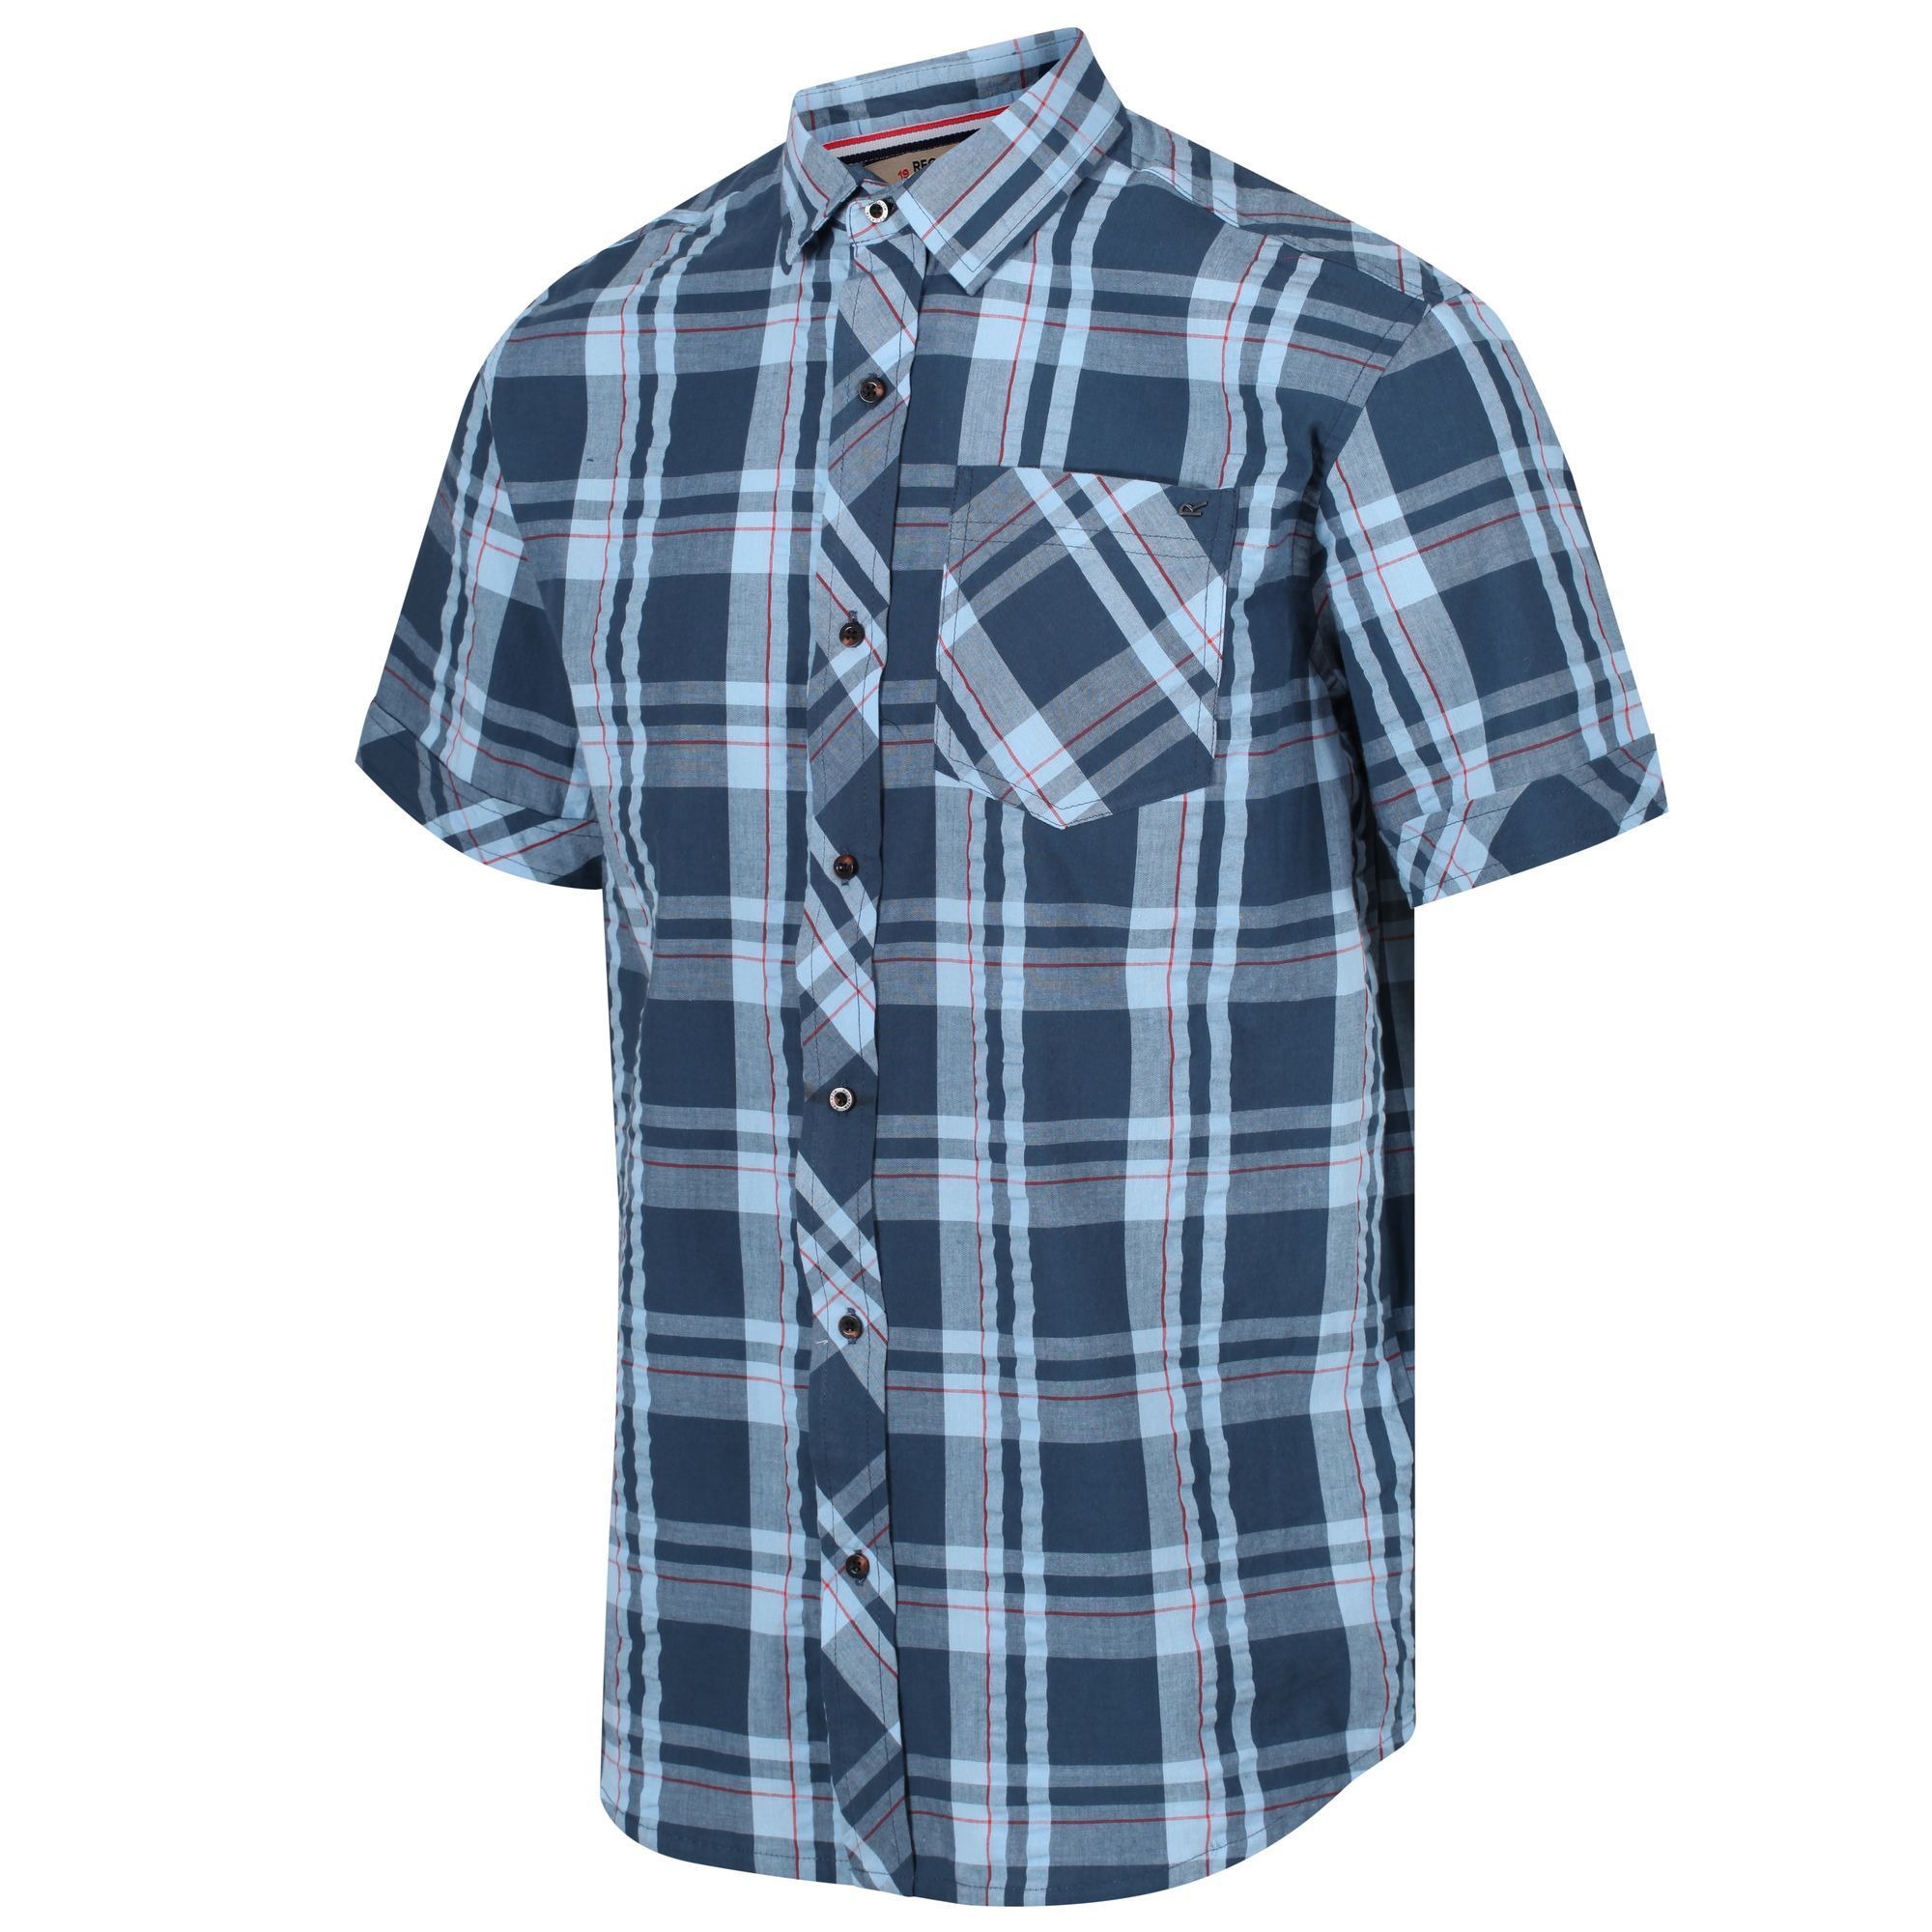 100% Cool weave cotton Check Seersucker. 1 chest pocket. Curved hem. Ideal addition to the summer fashion wardrobe.